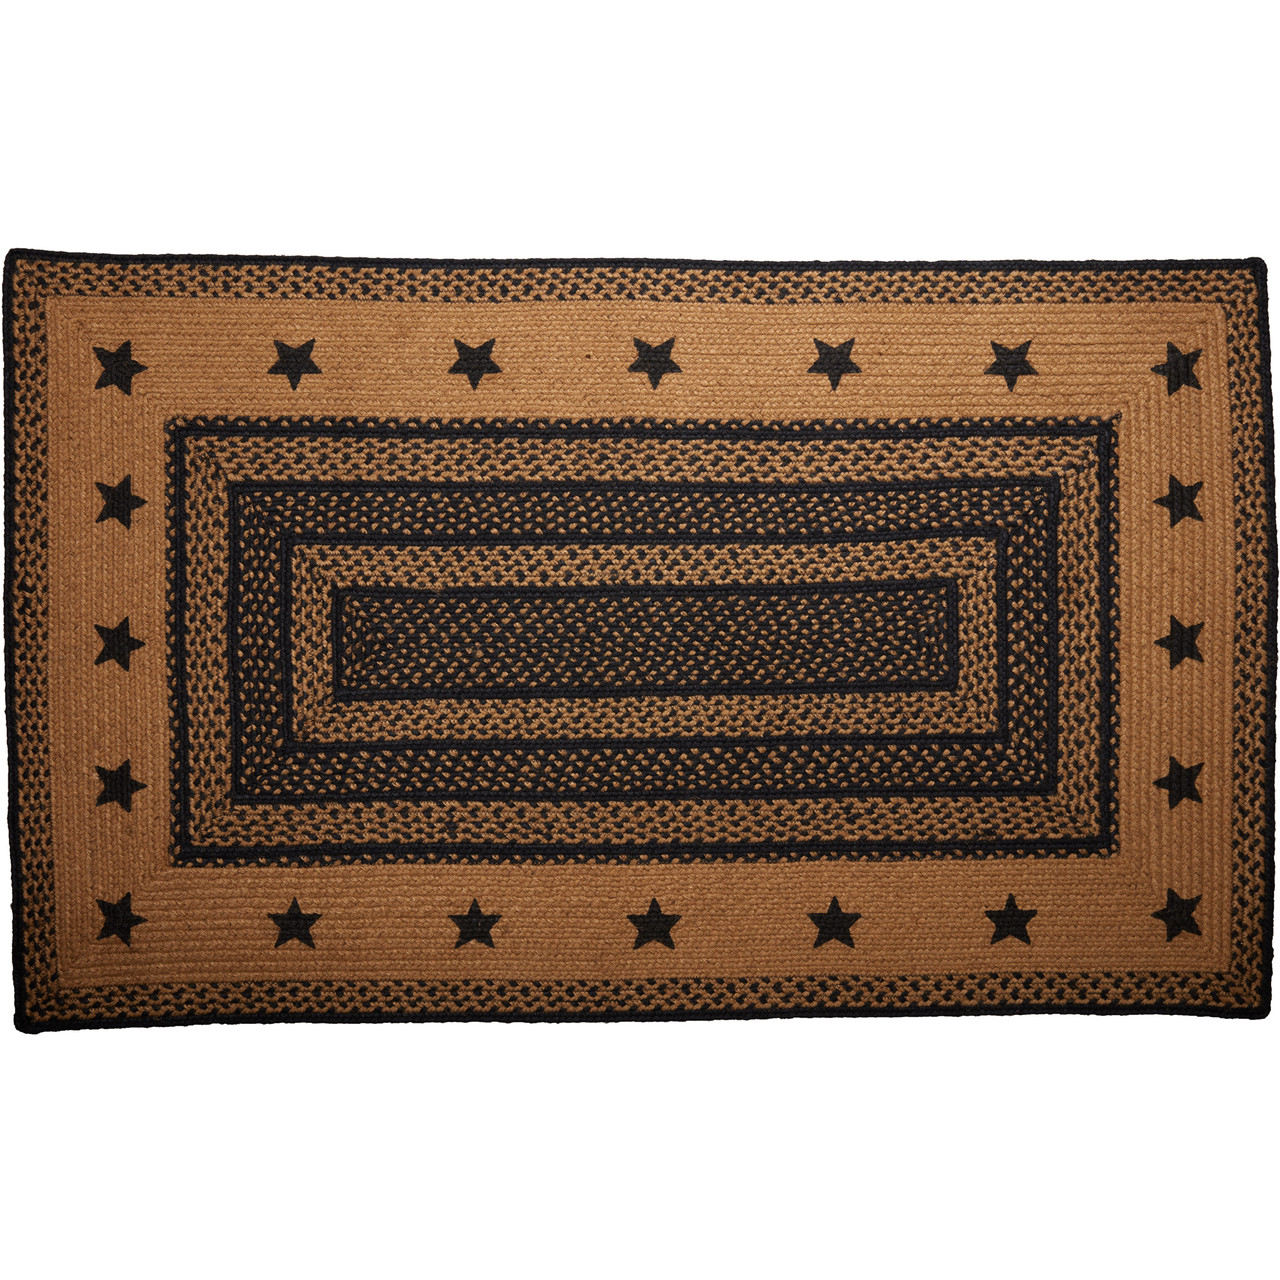 Black & Tan Jute Braided Rug/Runner Rect. with Rug Pad 2'x8' VHC